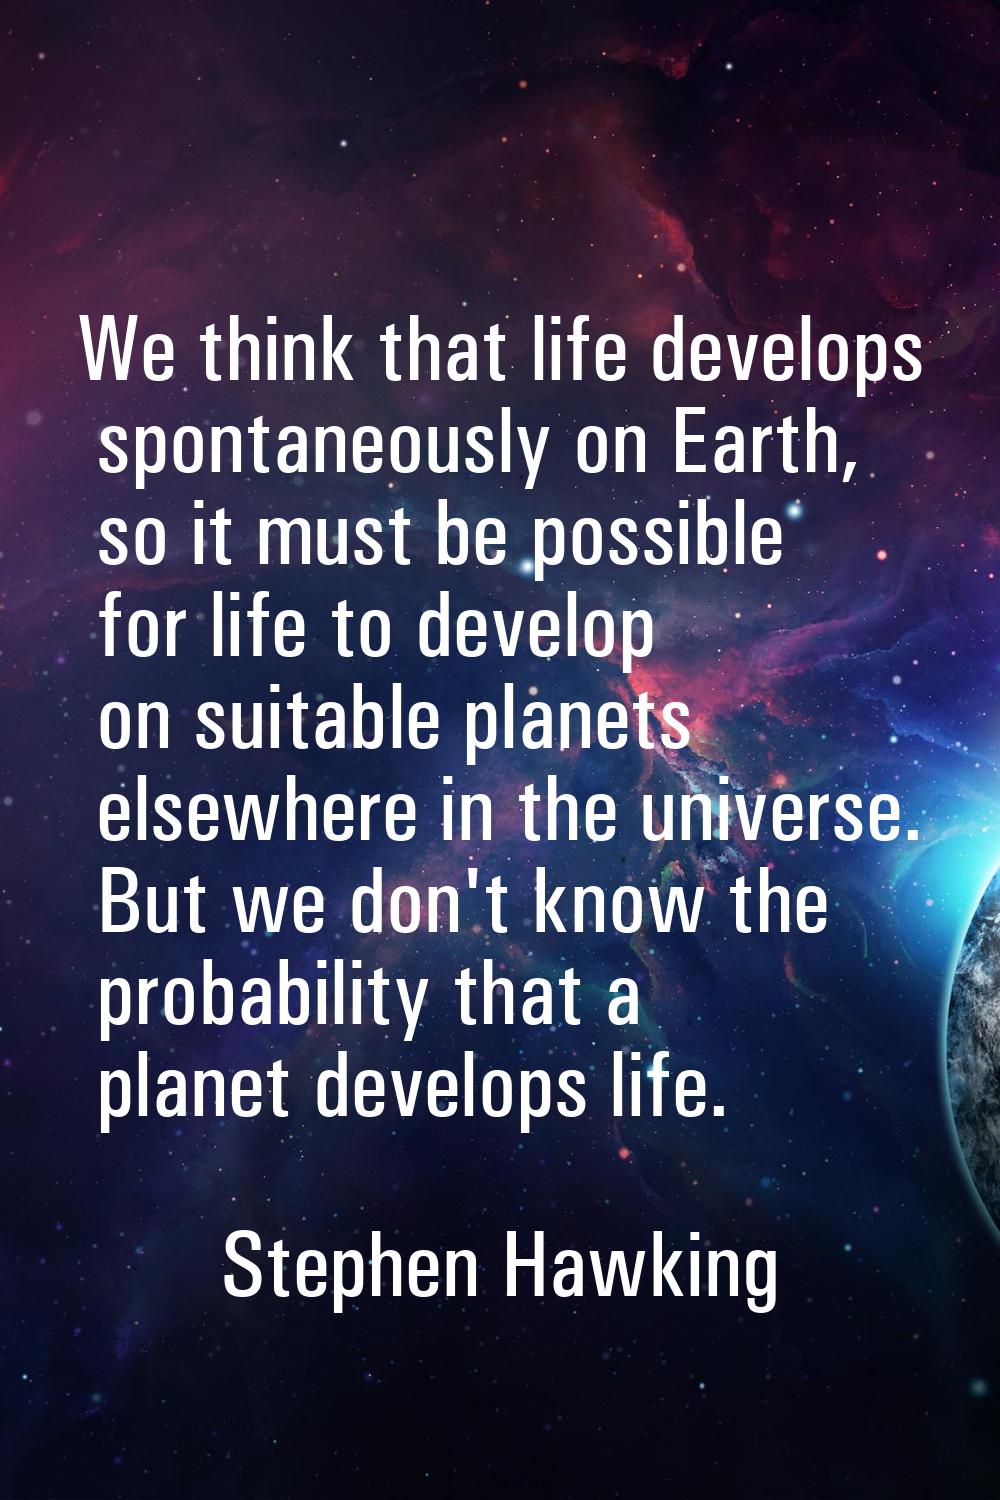 We think that life develops spontaneously on Earth, so it must be possible for life to develop on s